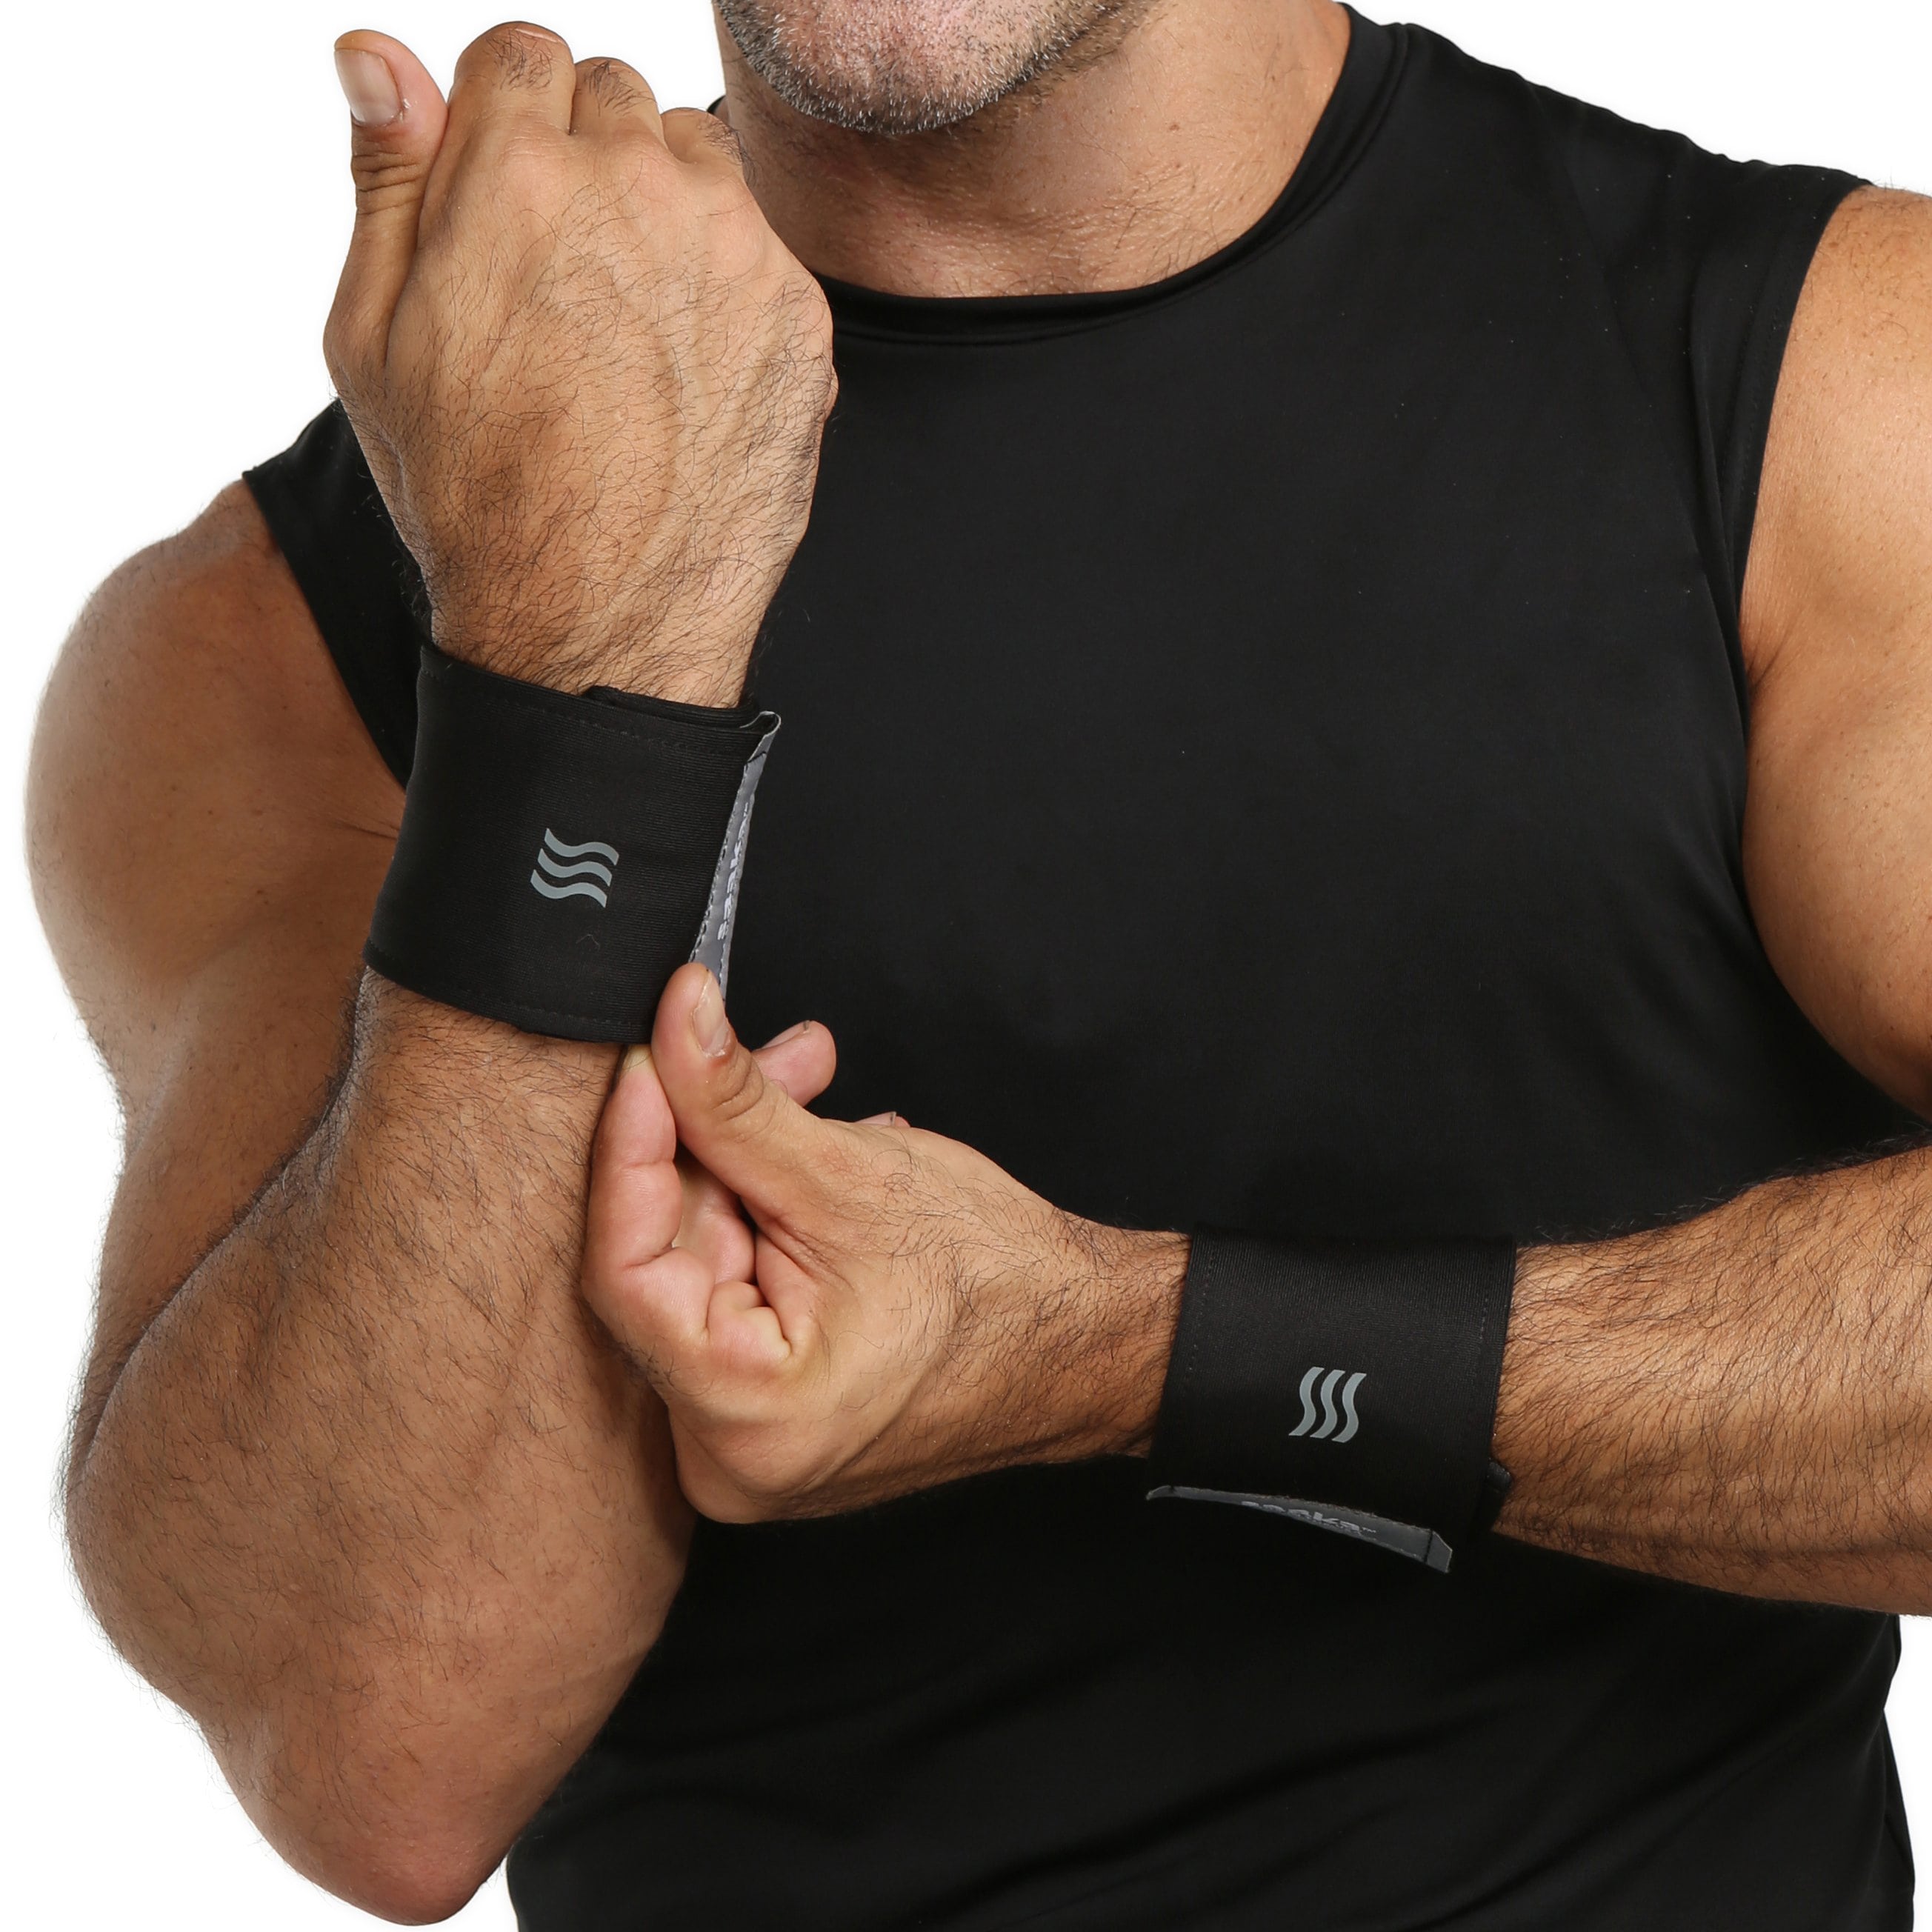 Black Sport wristbands for sweat.